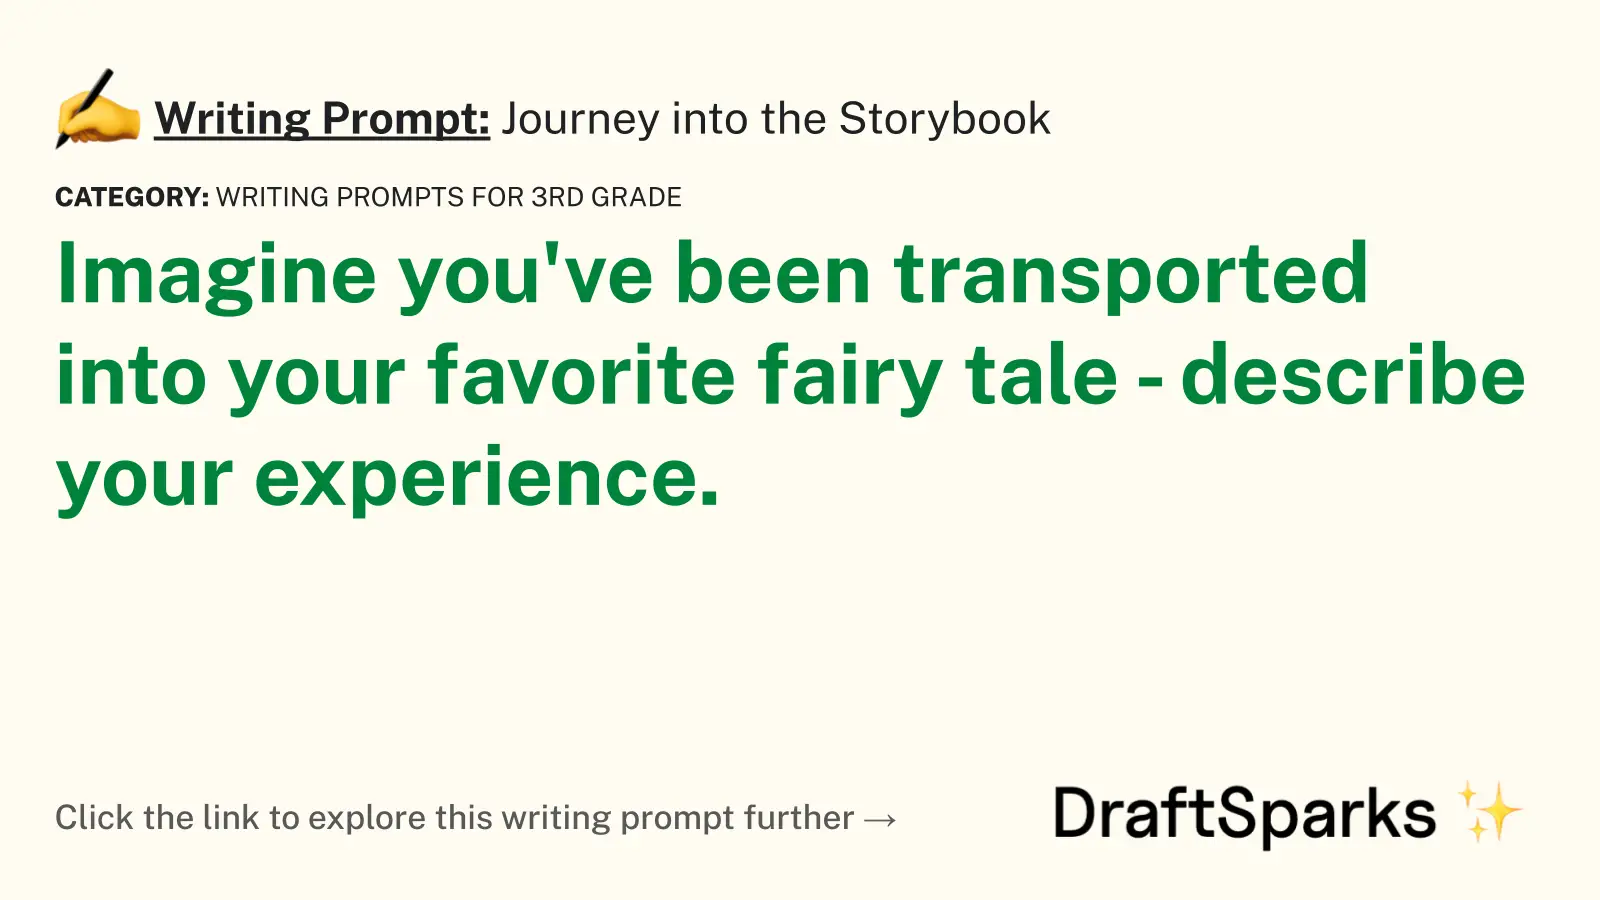 Journey into the Storybook